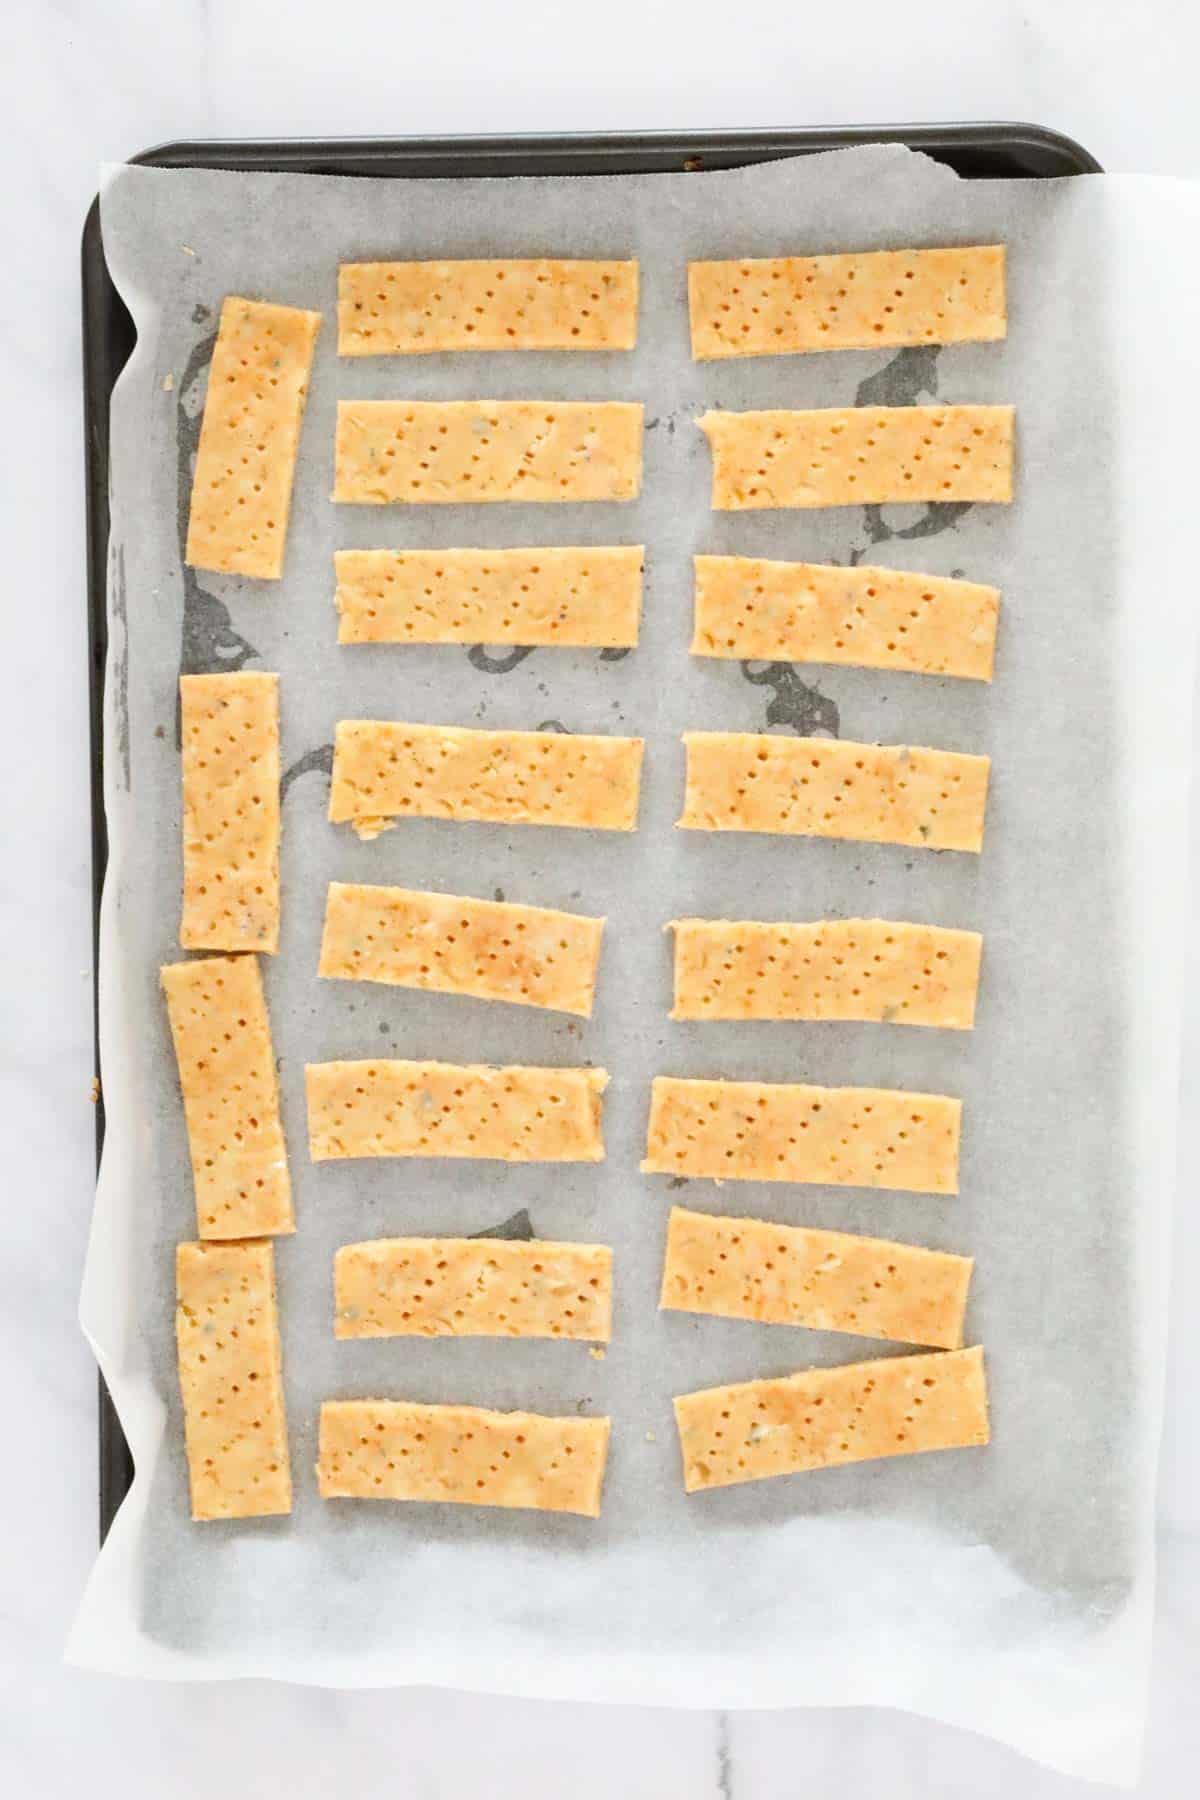 Cheese sticks placed on a lined baking tray.